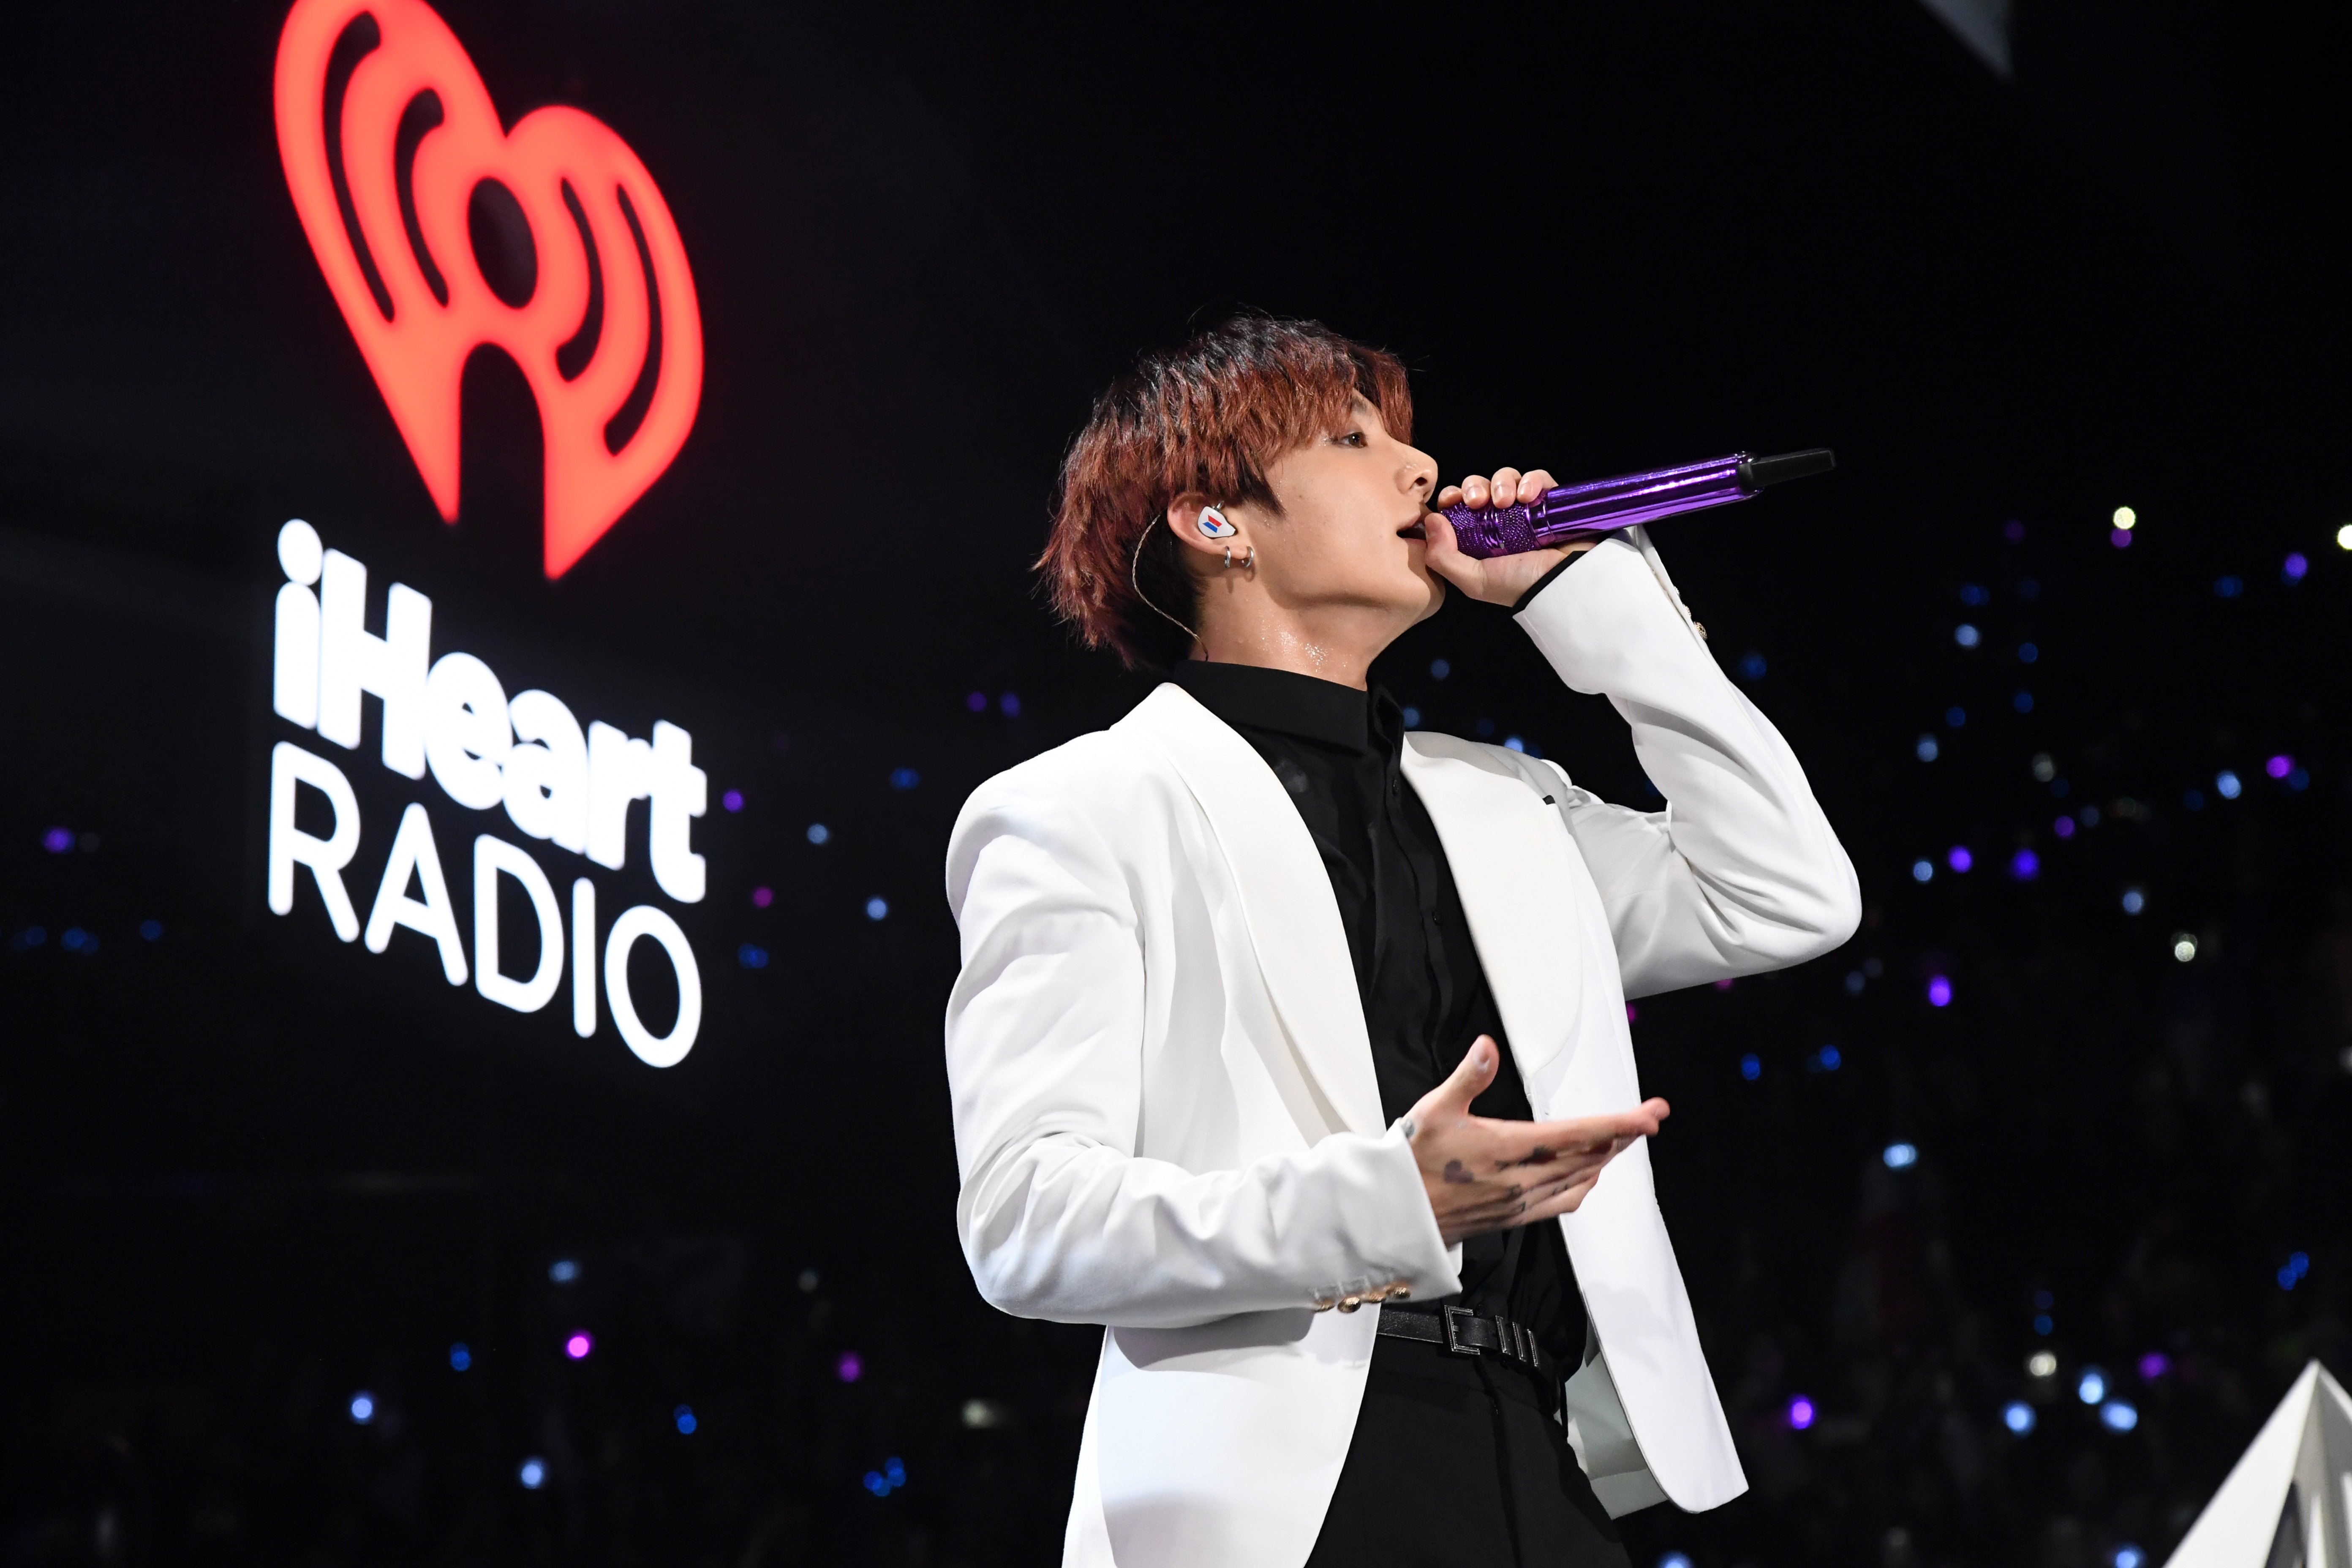 Jungkook of BTS performs onstage during 102.7 KIIS FM's Jingle Ball 2019